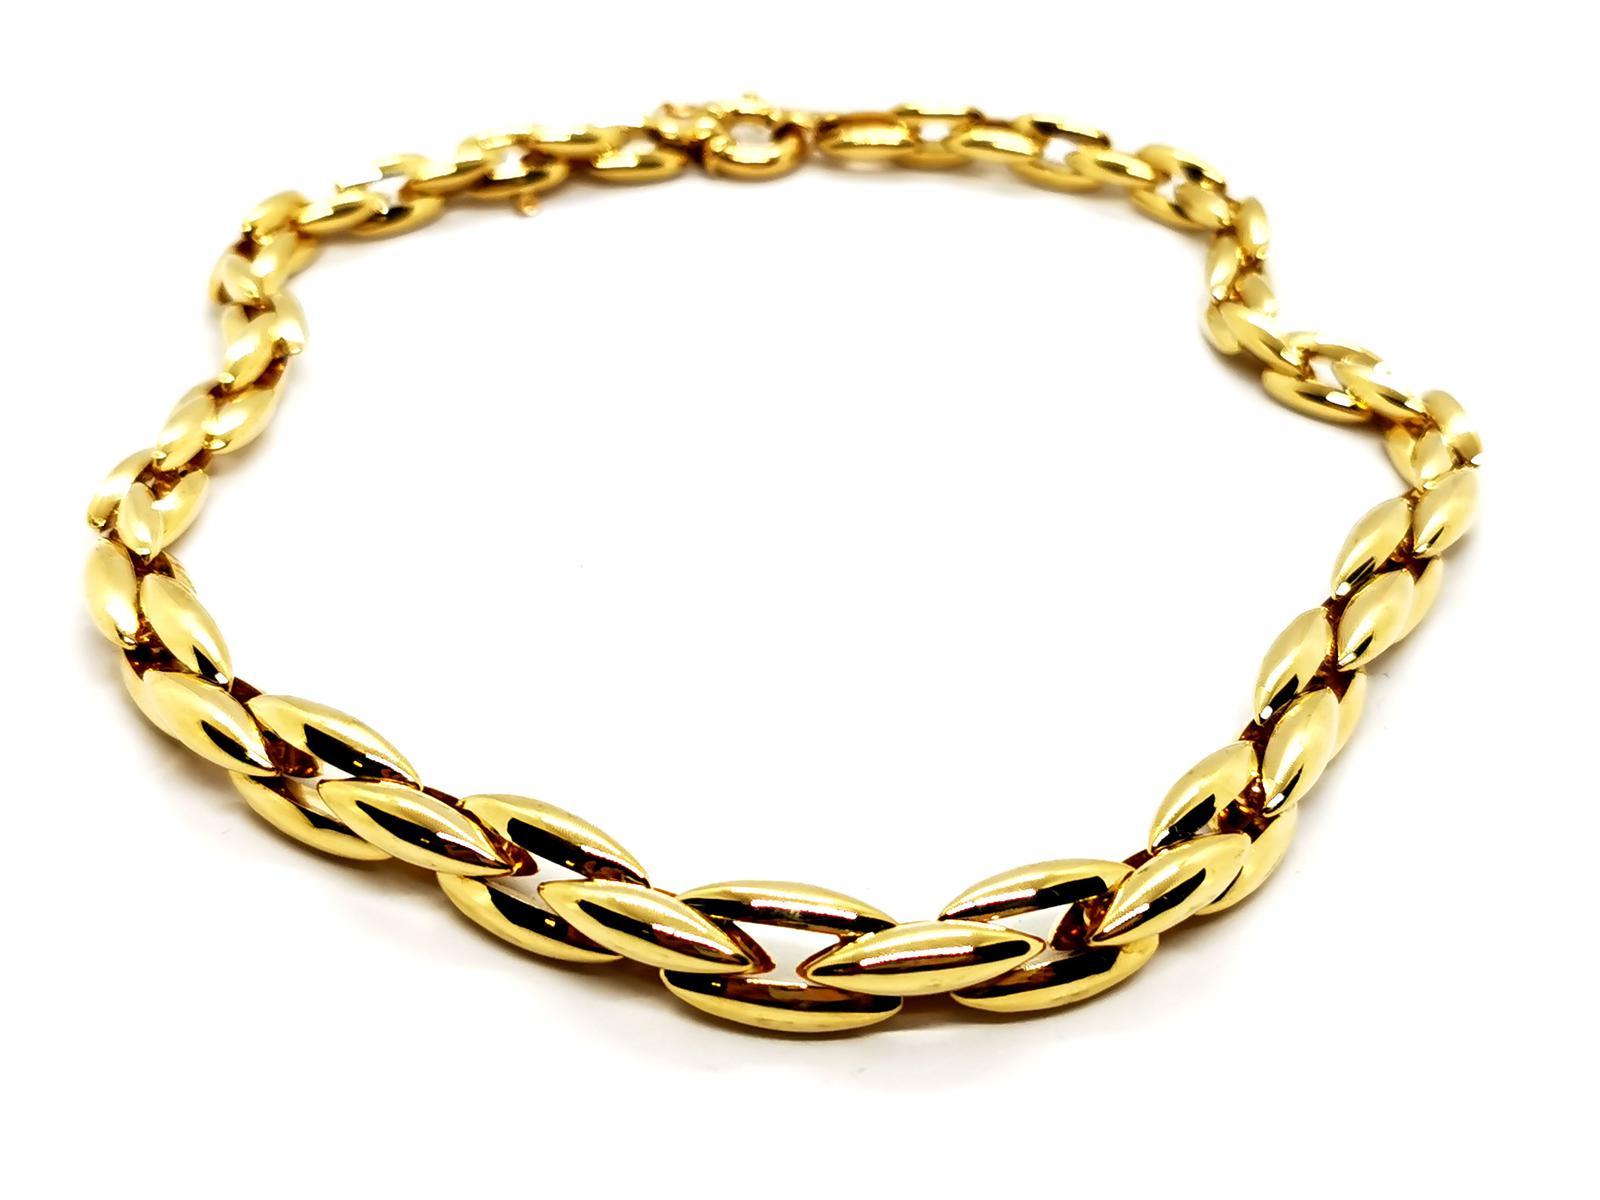 Drop necklace. gold yellow 750 mils (18K). composed of a succession of rice grain patterns. in fall. the collar length: 43 cm. clamp width: 1.04 cm. total weight: 64.13 g. clasp buoy. safety chain. punch eagle head. excellent condition.
